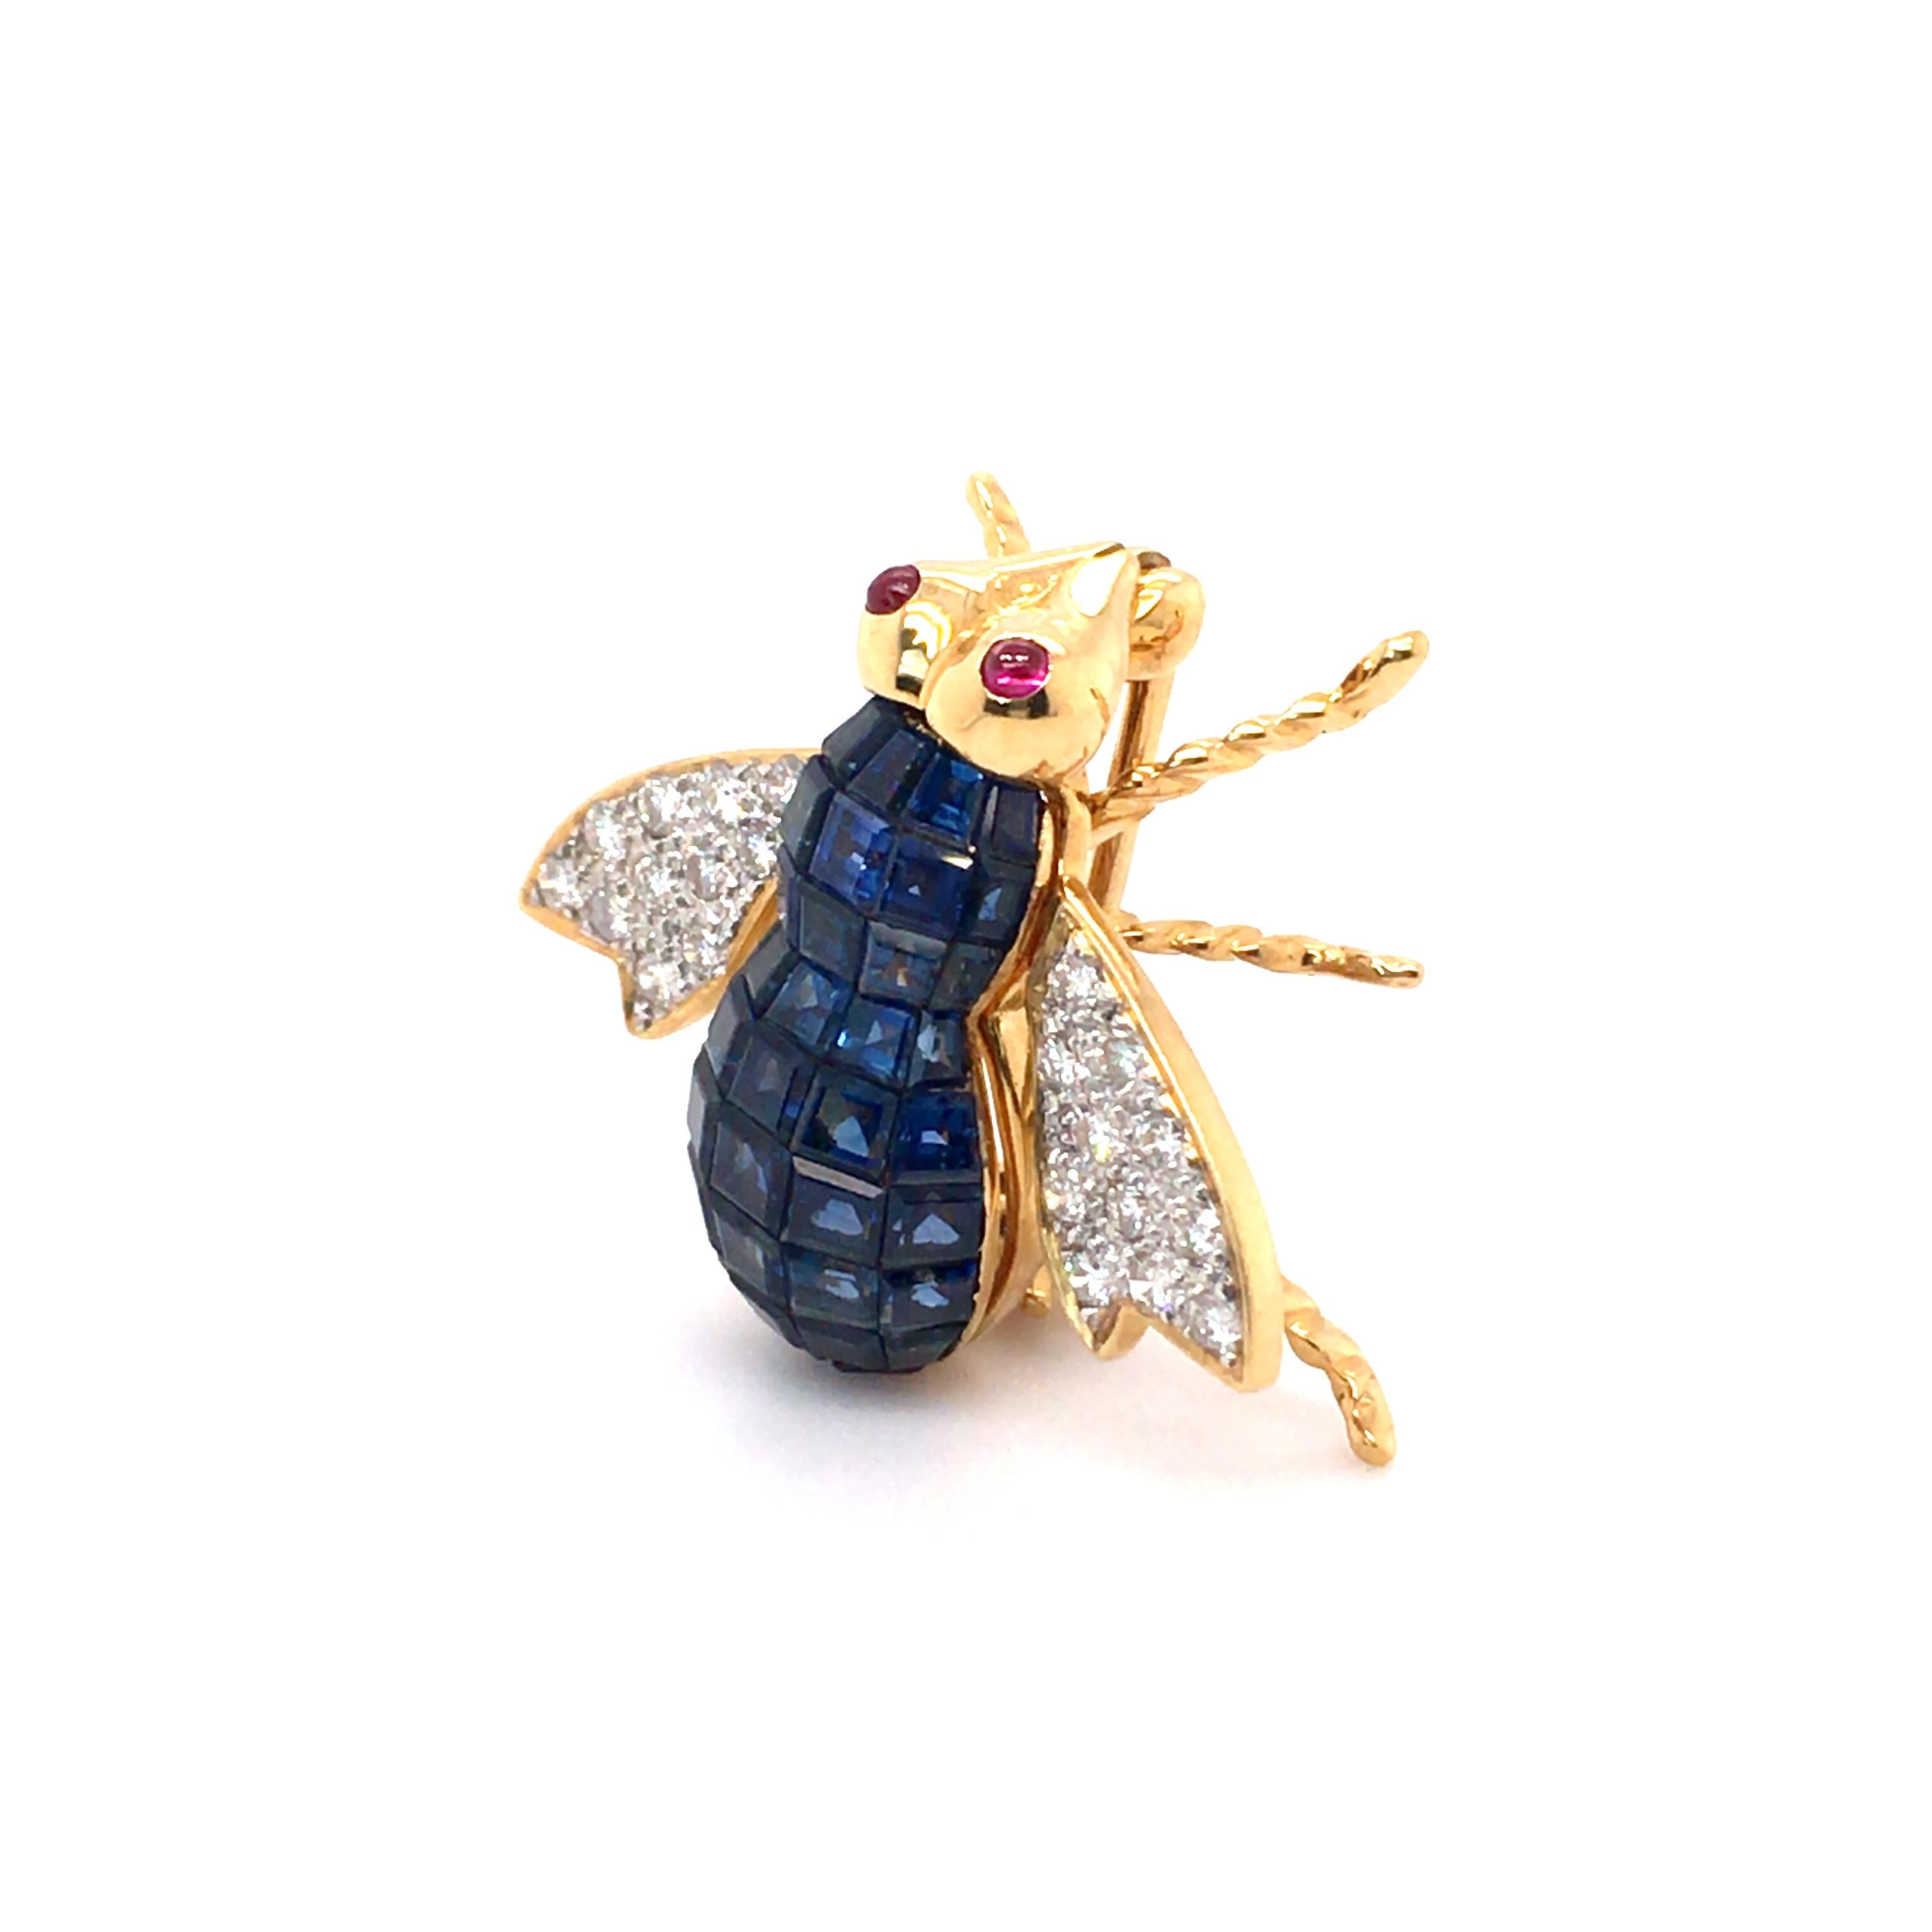 This charming insect brooch from the Haruni Vaults is handmade in 18k yellow gold with deep blue sapphires forming the body, pave-set sparkling diamonds in the wings, and round ruby cabochon eyes.

